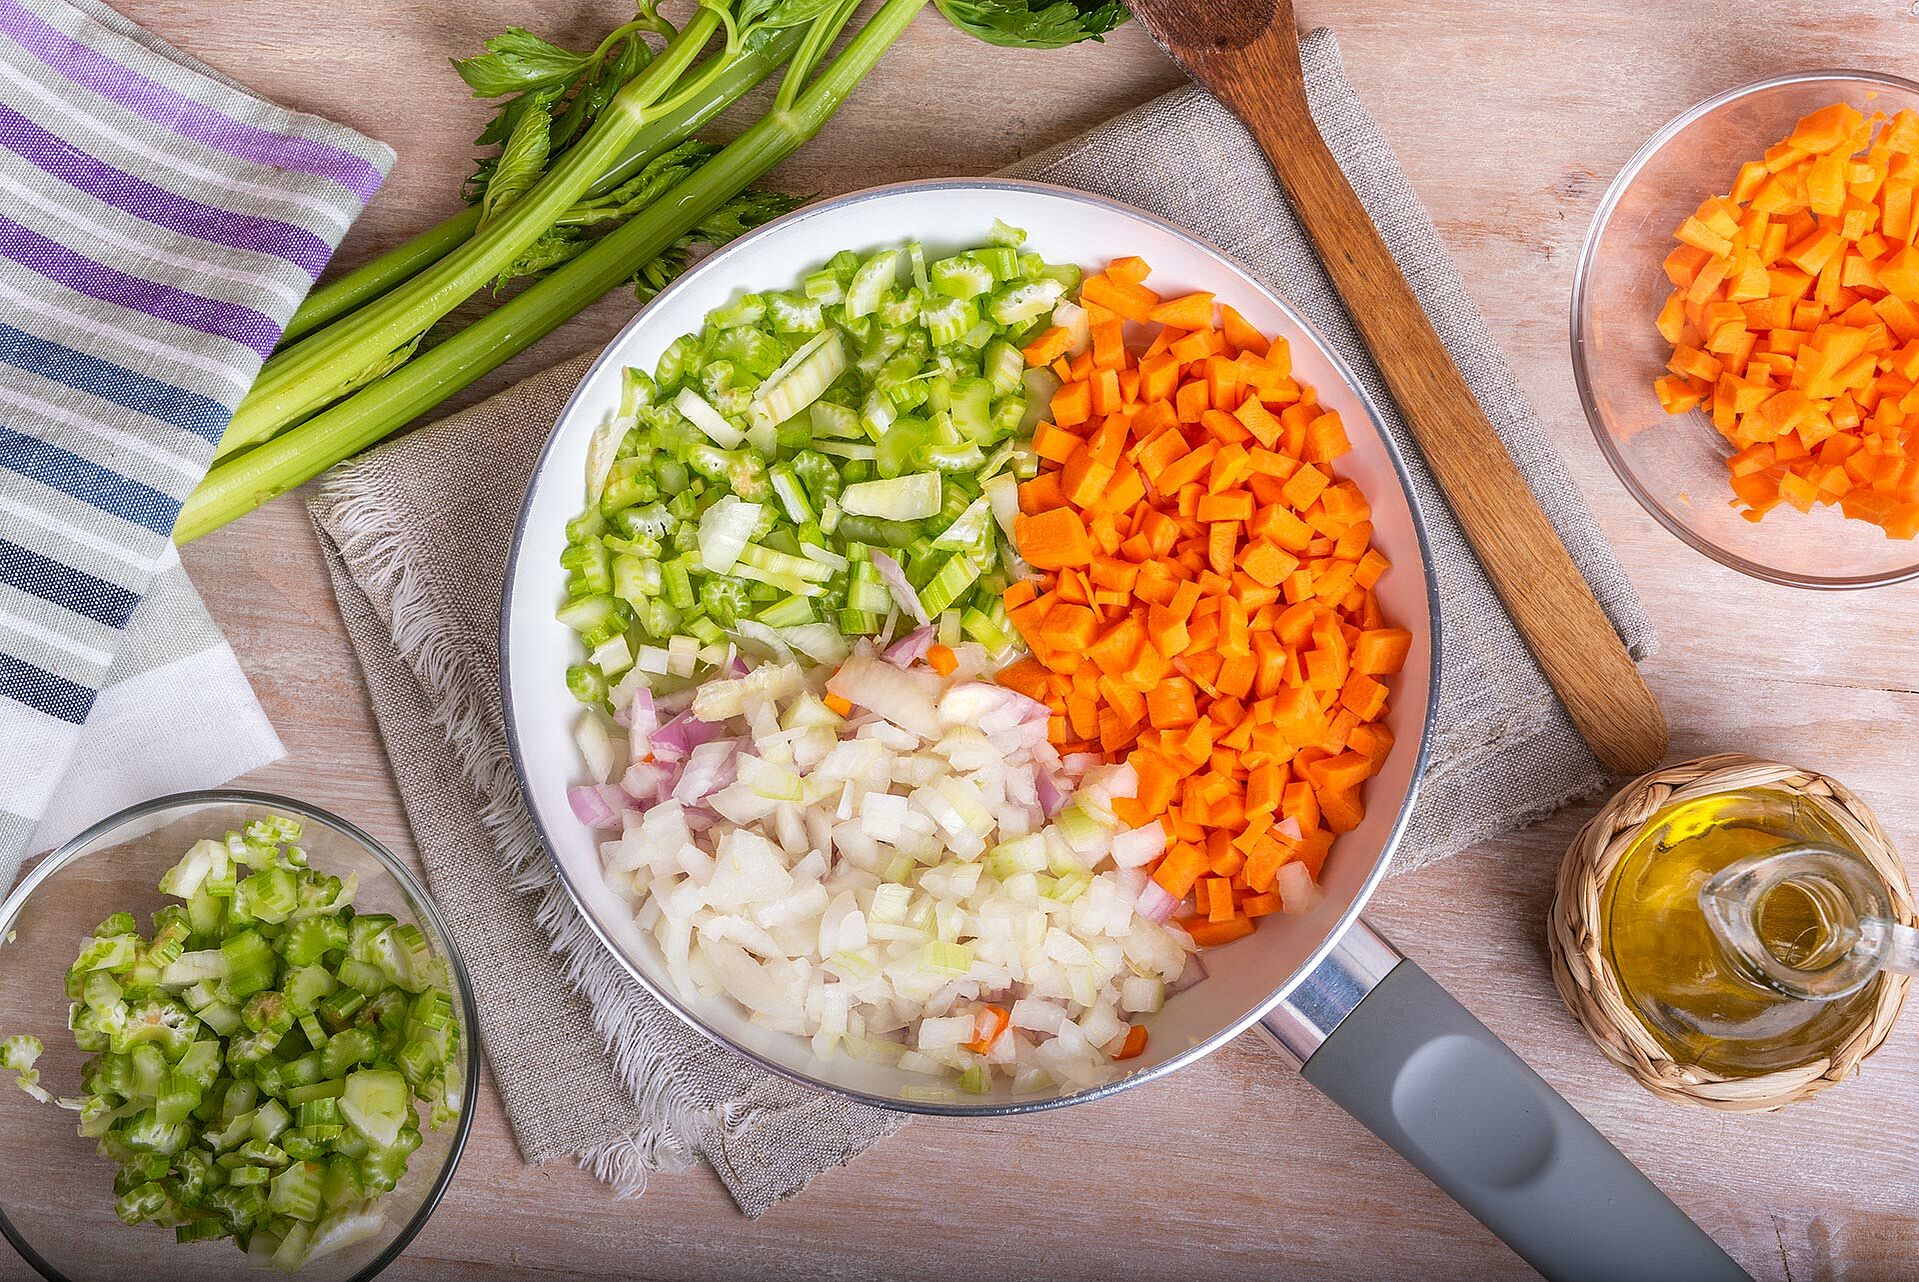 Carrots, celery and onions in a pan.